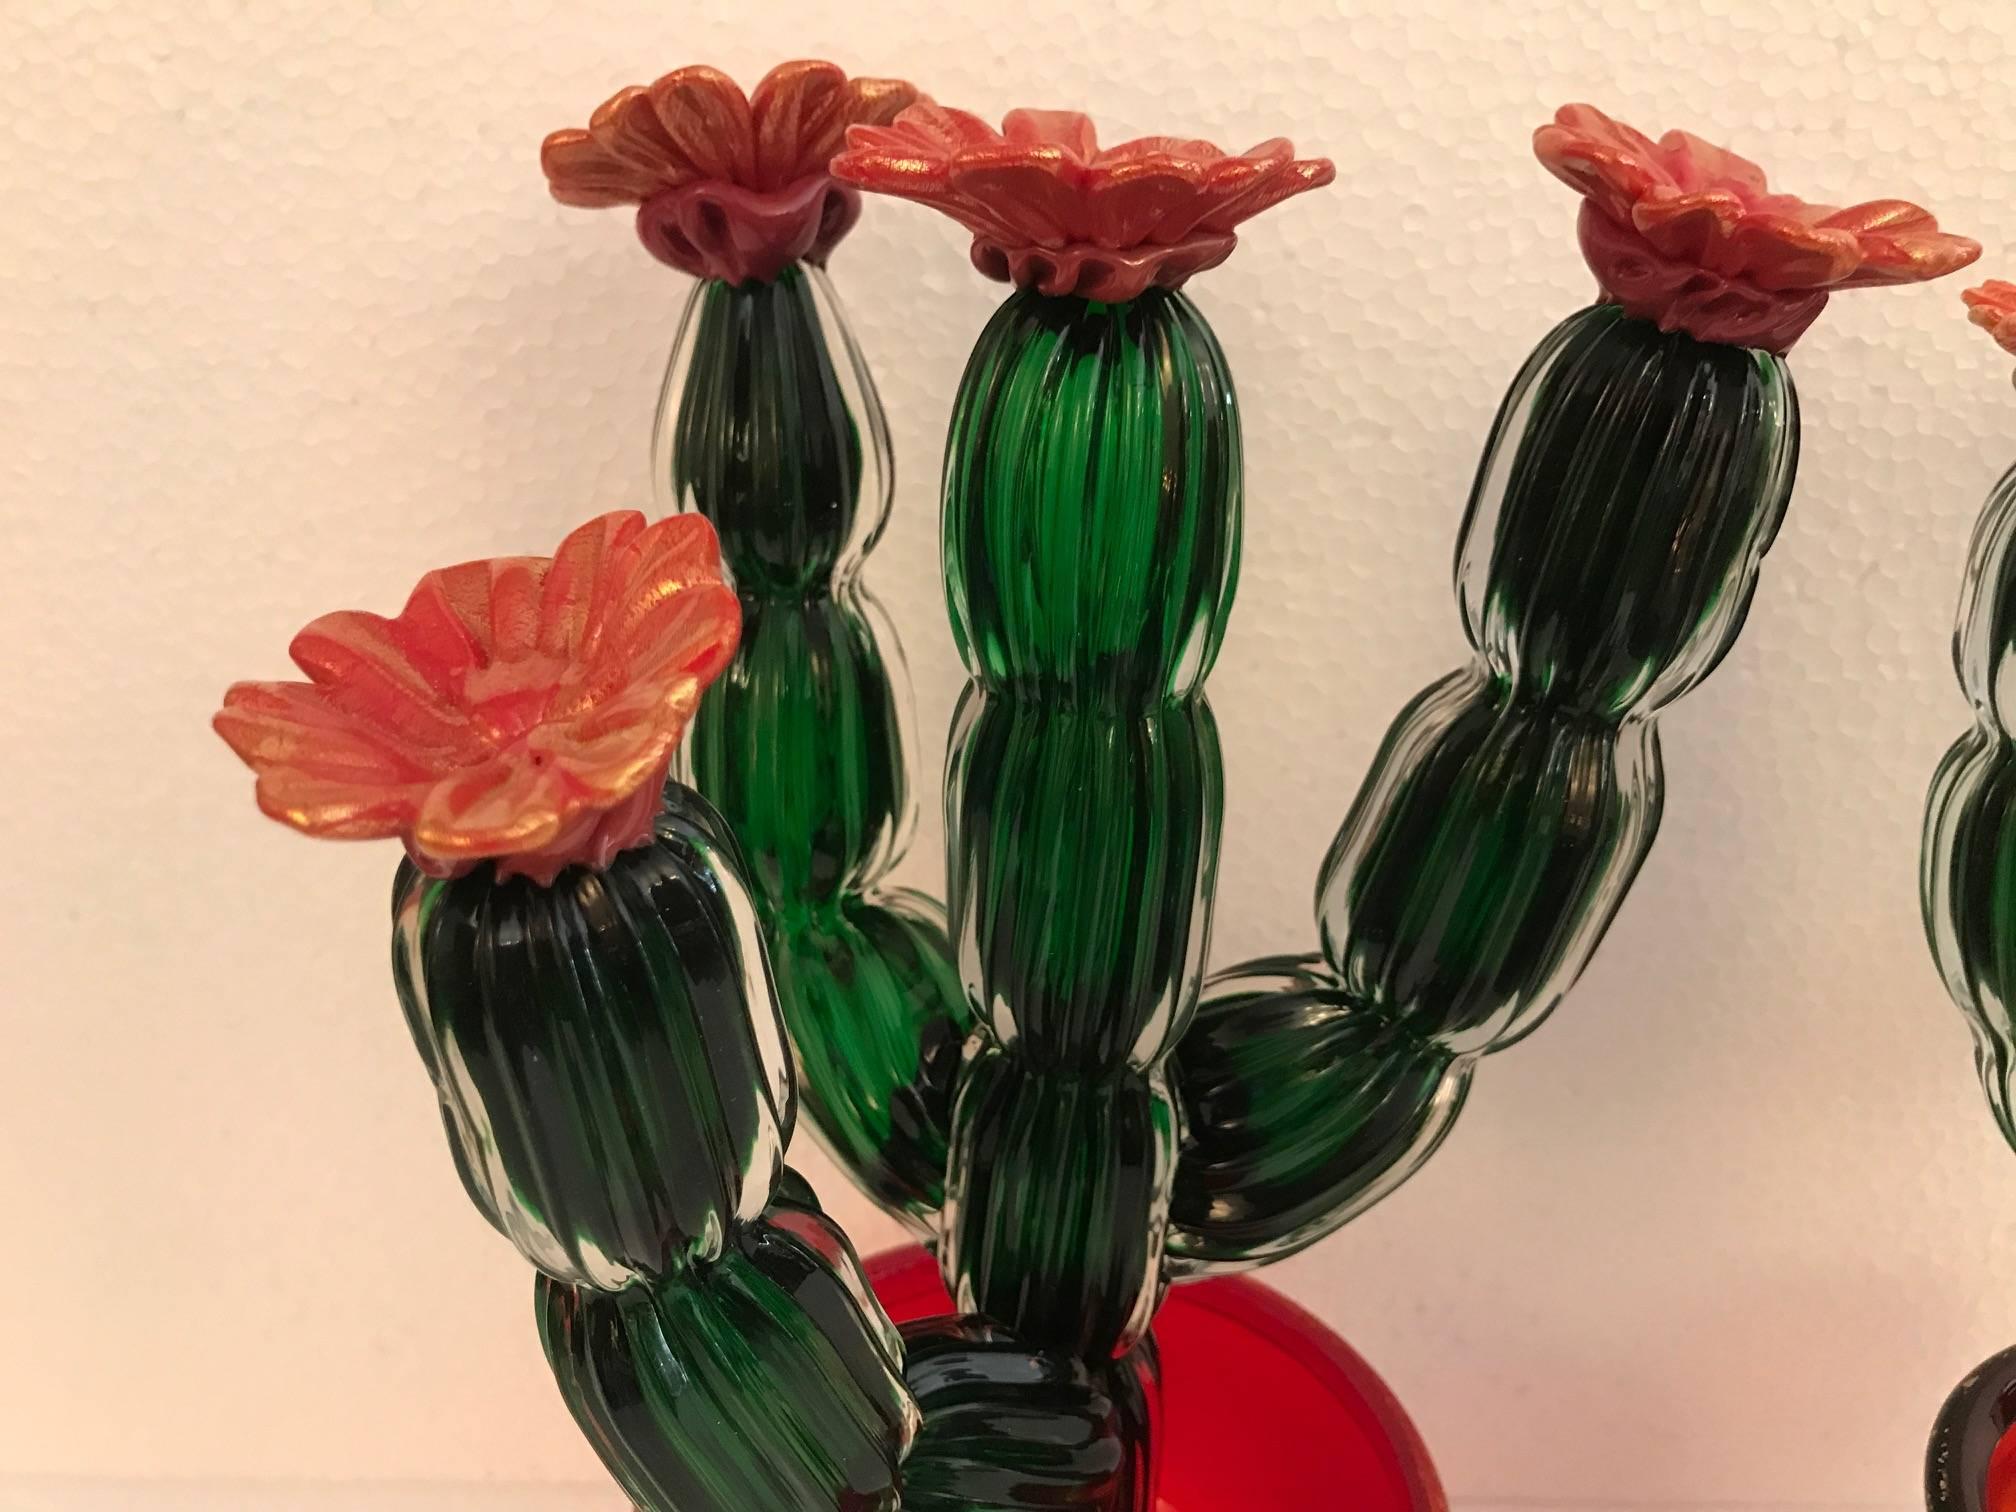 Blown Glass Two Murano Glass Cactus in Pots